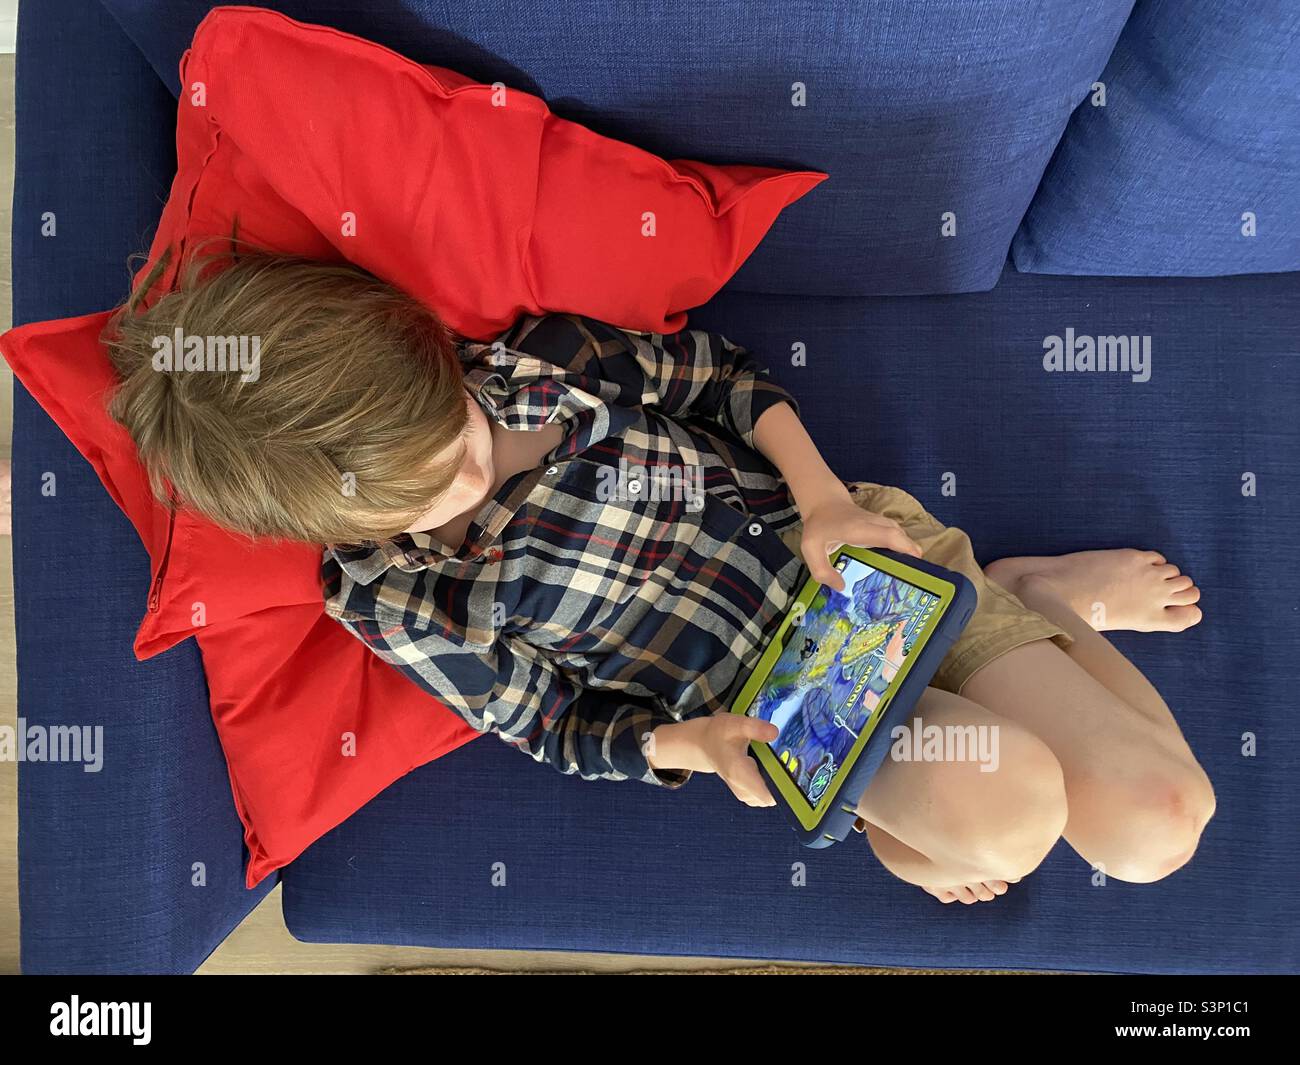 Top view of child playing video games on an iPad Stock Photo